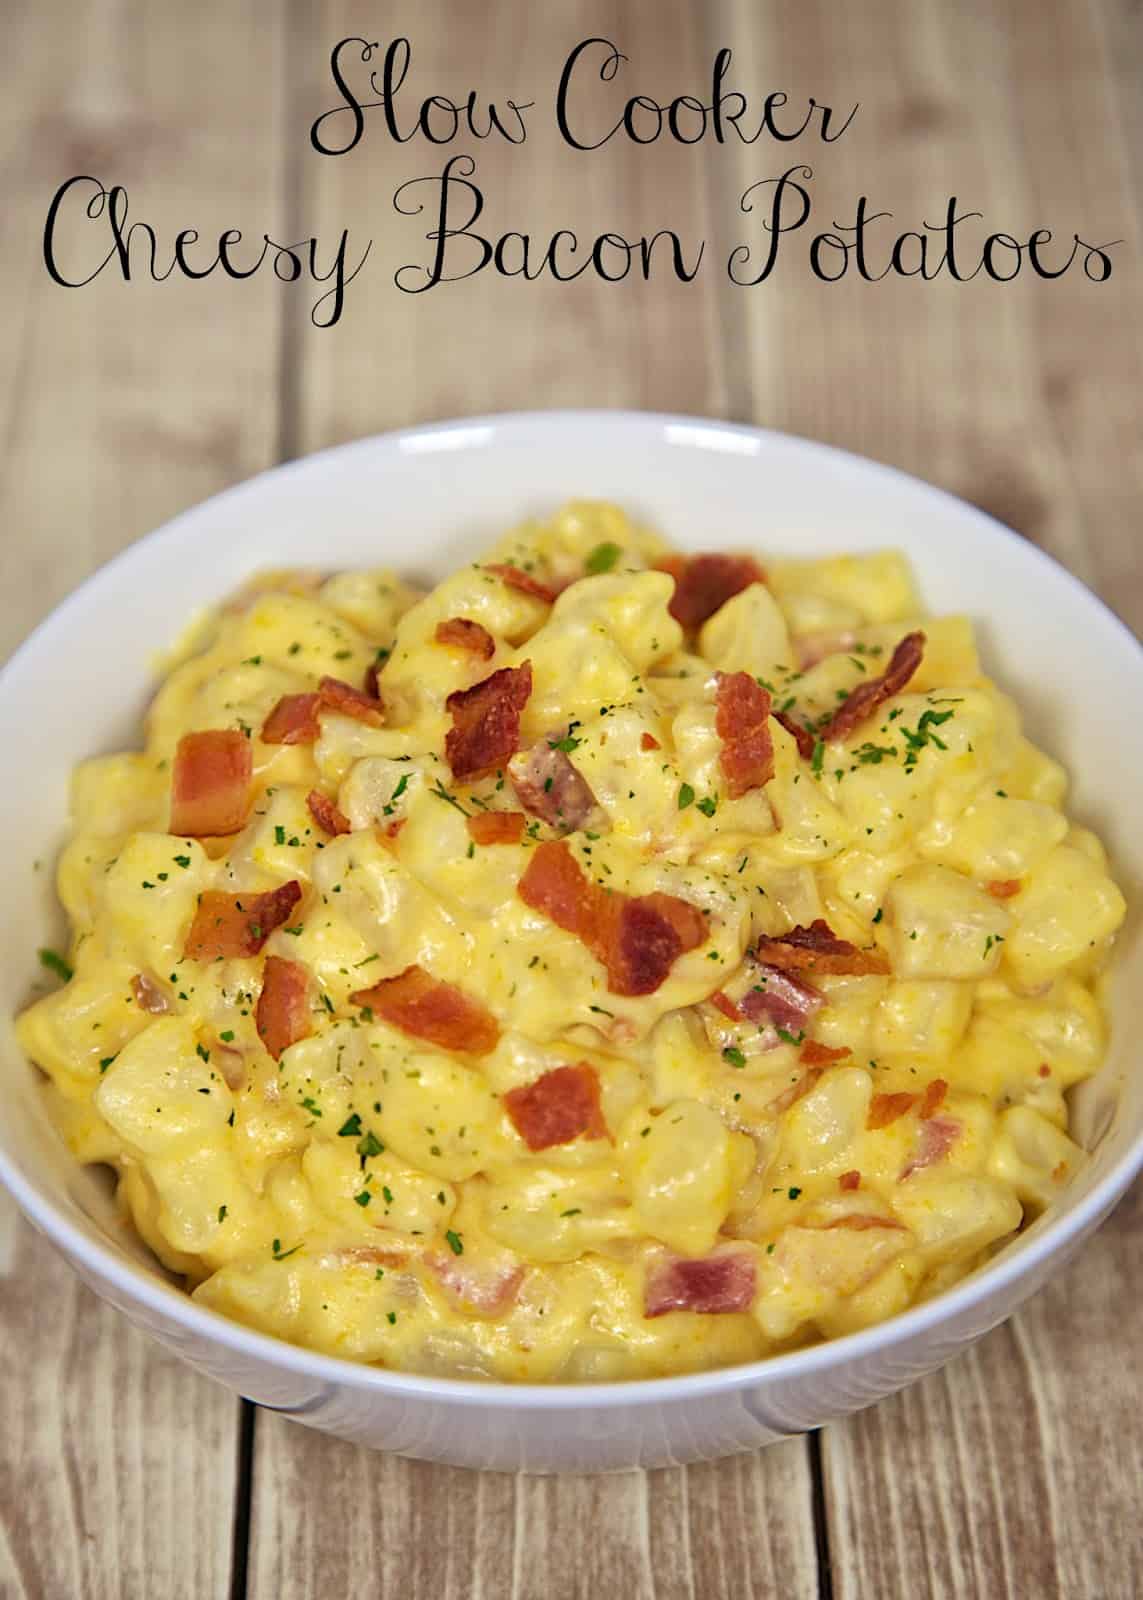 Slow Cooker Cheesy Bacon Potatoes Recipe - frozen hash browns, cheese, bacon slow cook all day for a delicious side dish!